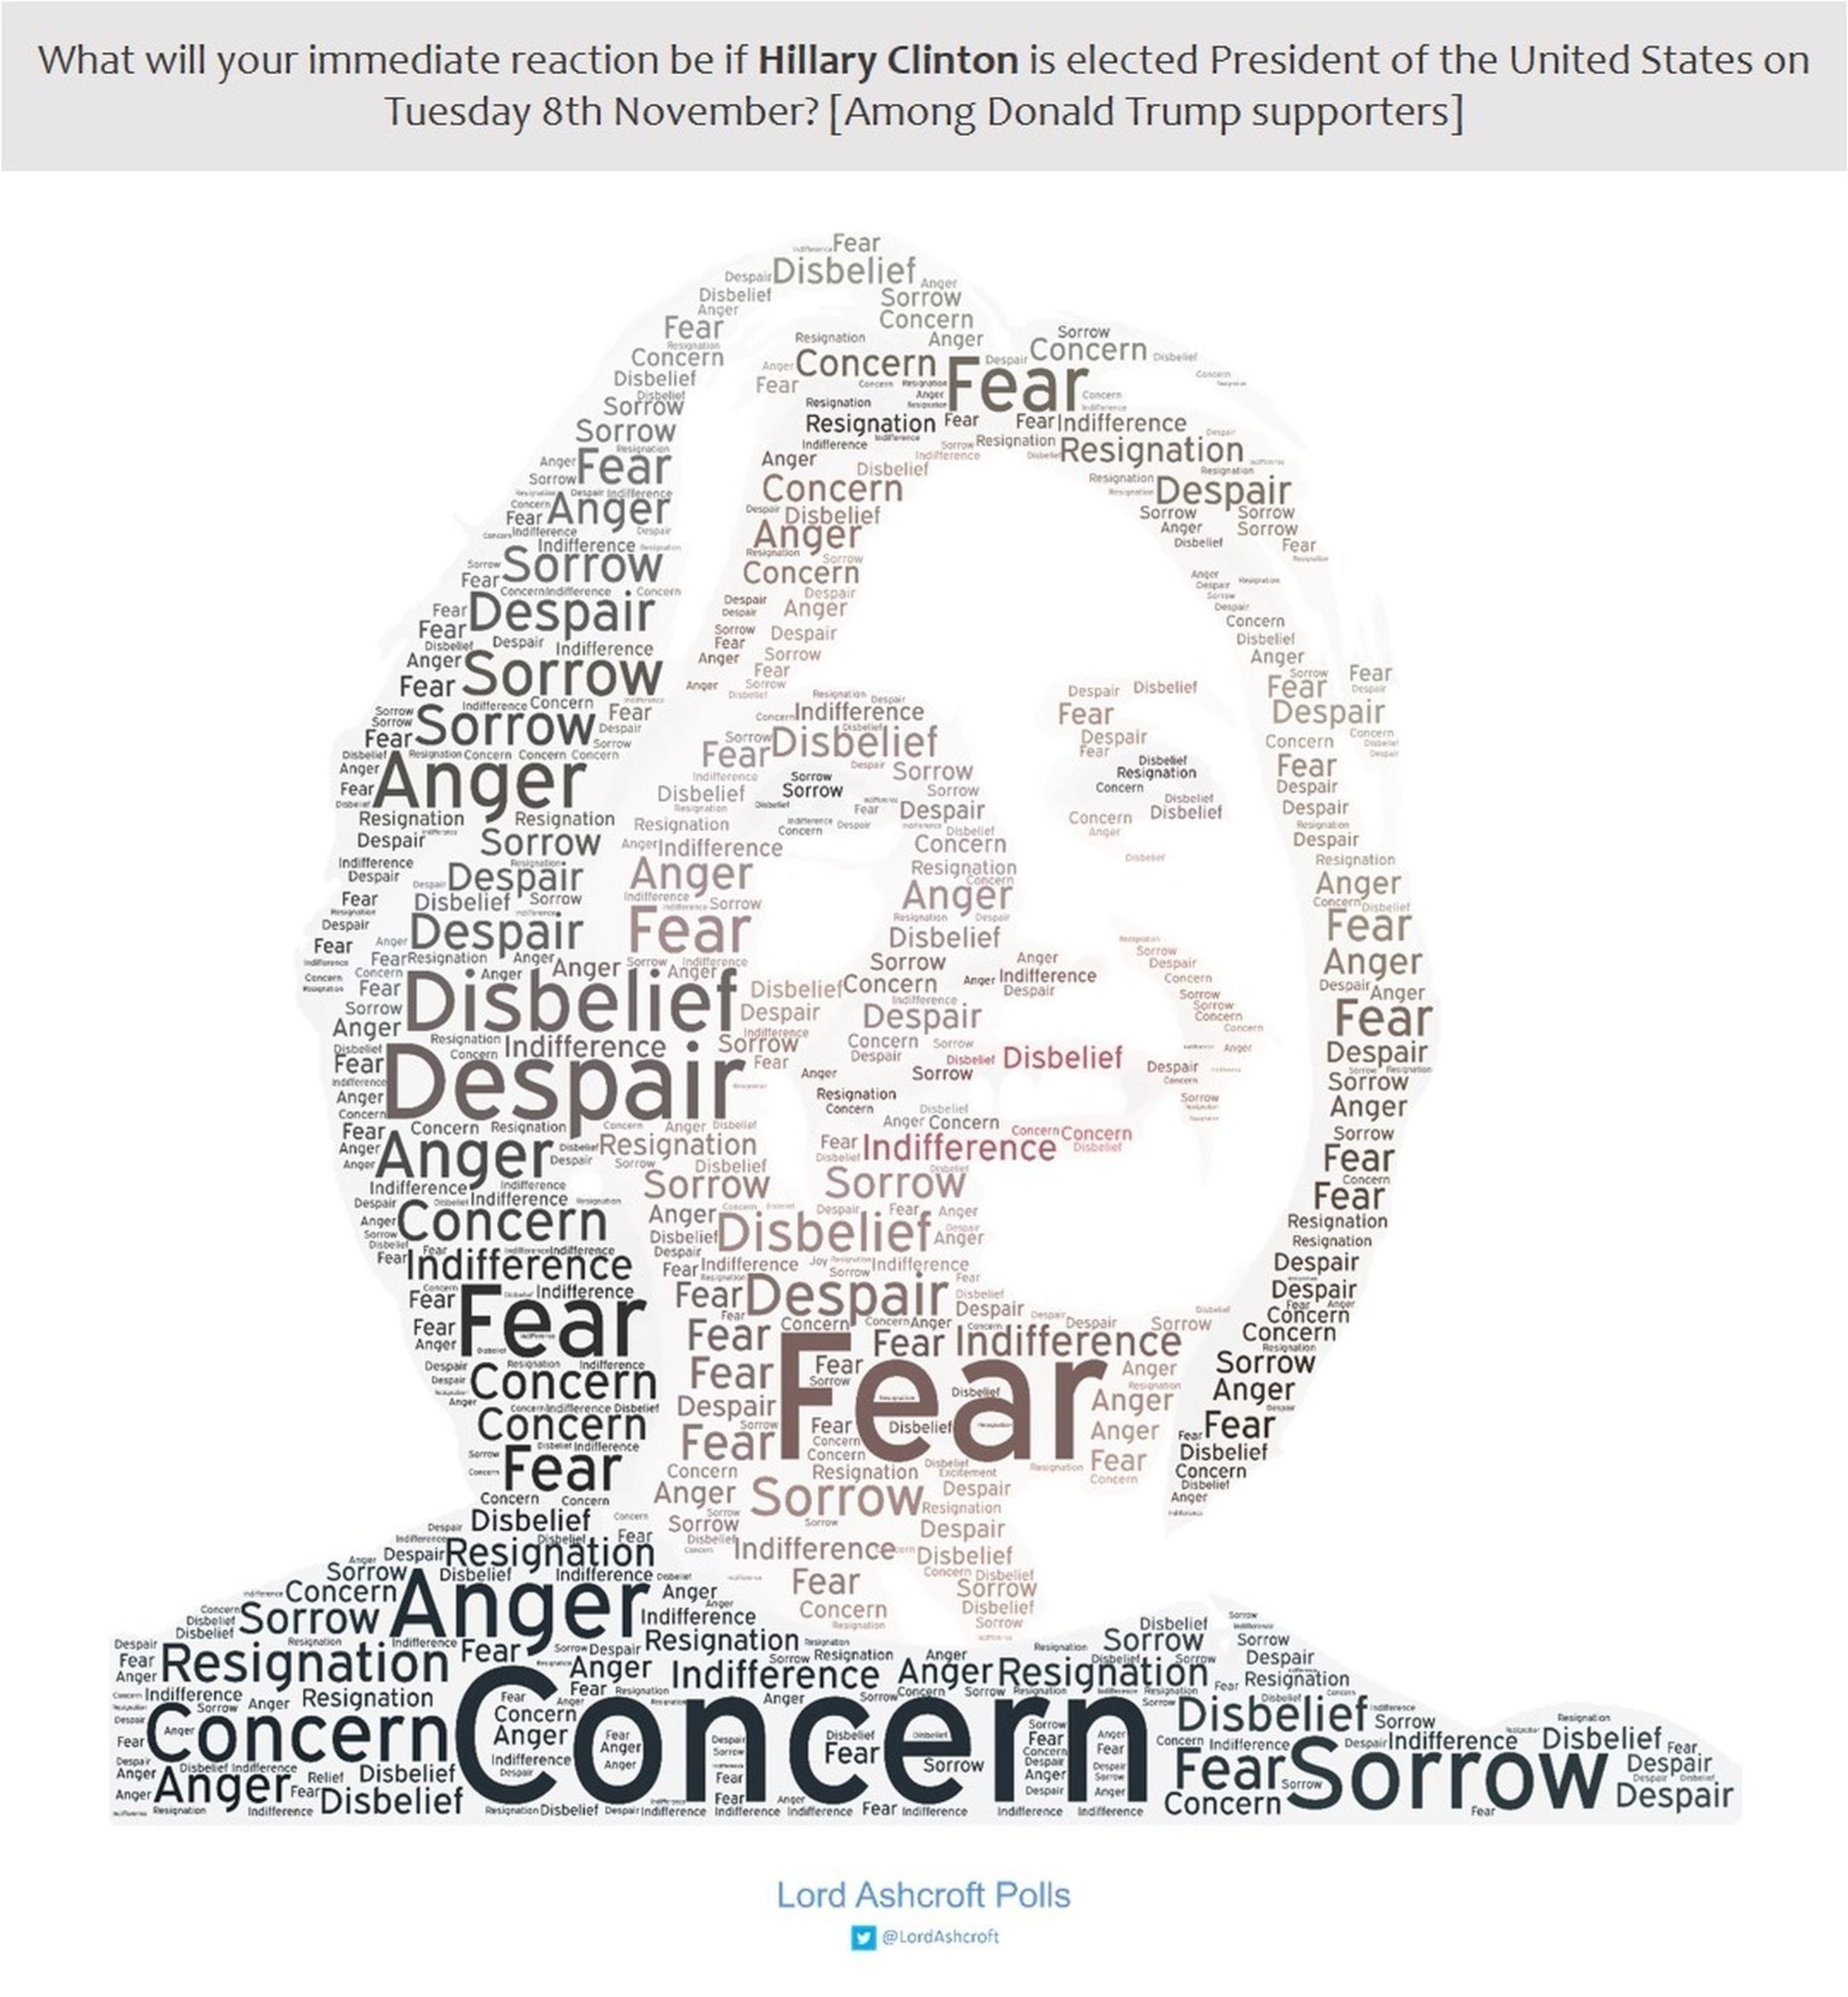 Words chosen by Trump voters to describe how they would feel if Clinton were to win (PRNewsFoto/lordashcroftpolls.com)